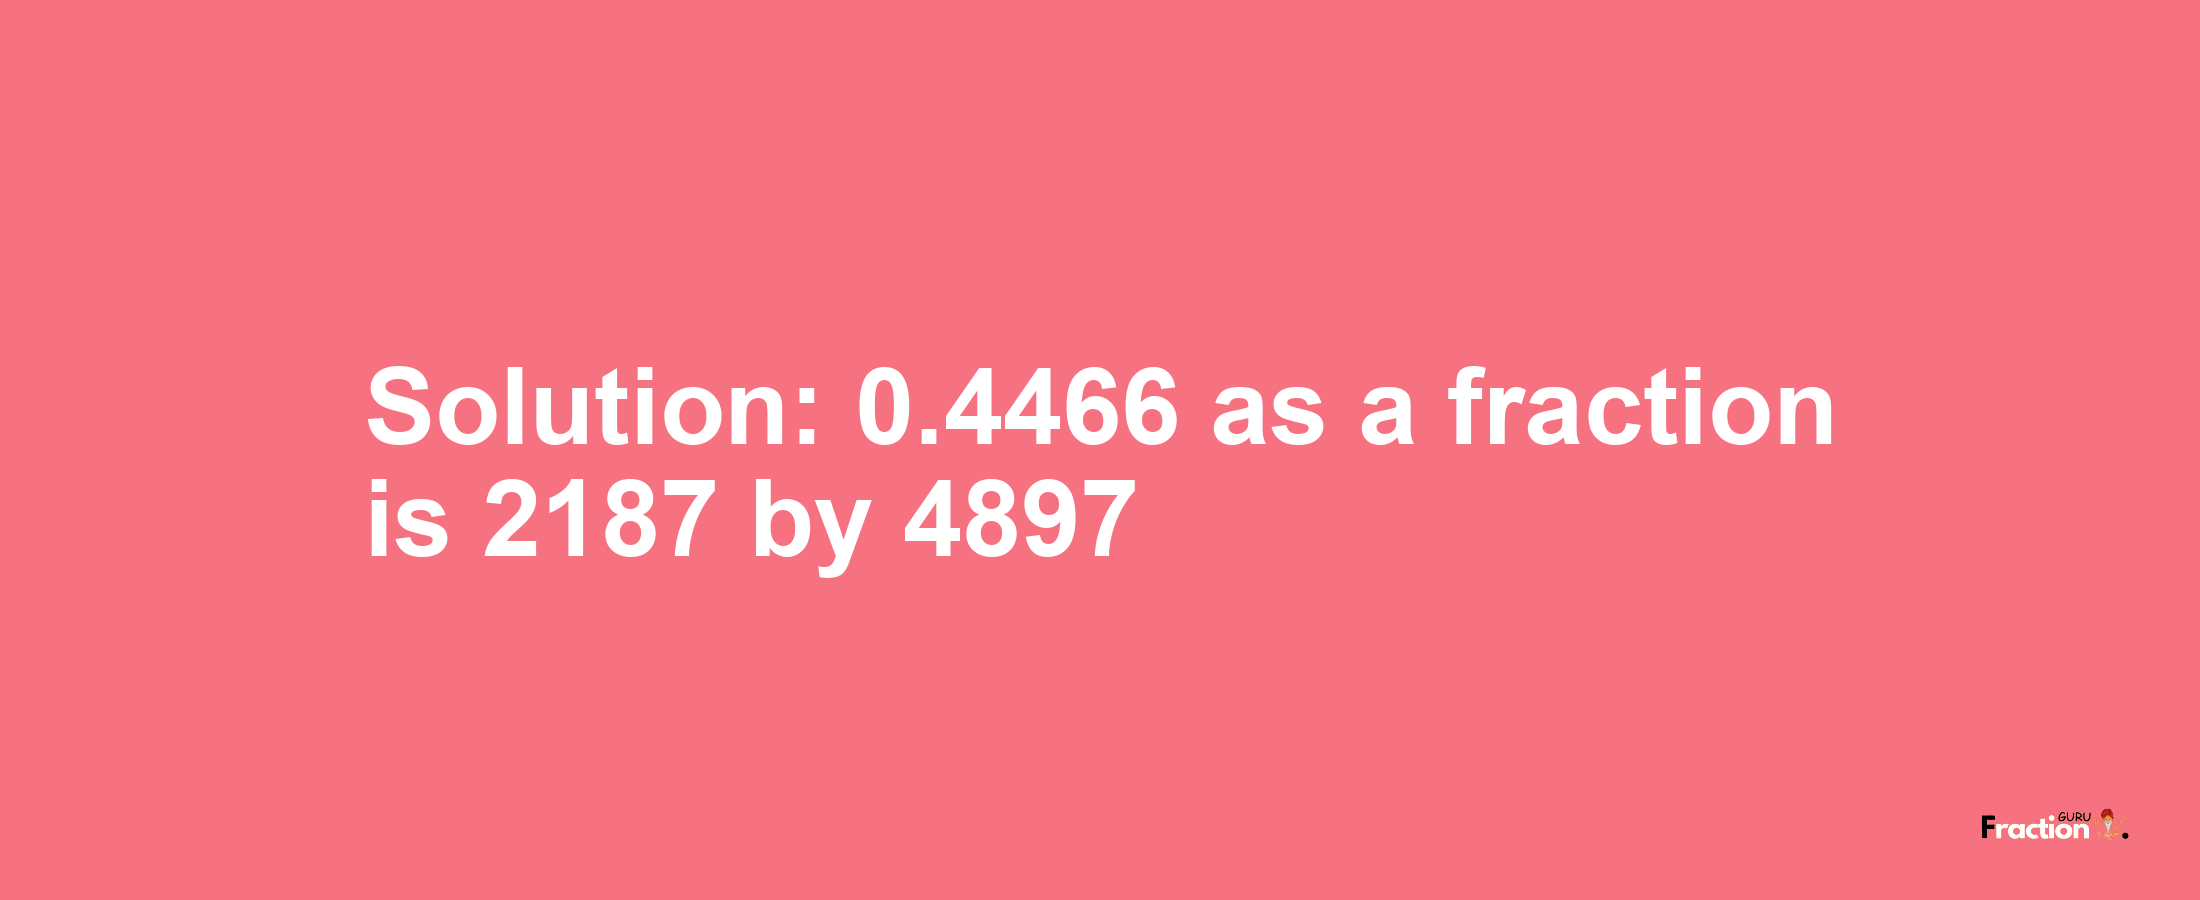 Solution:0.4466 as a fraction is 2187/4897